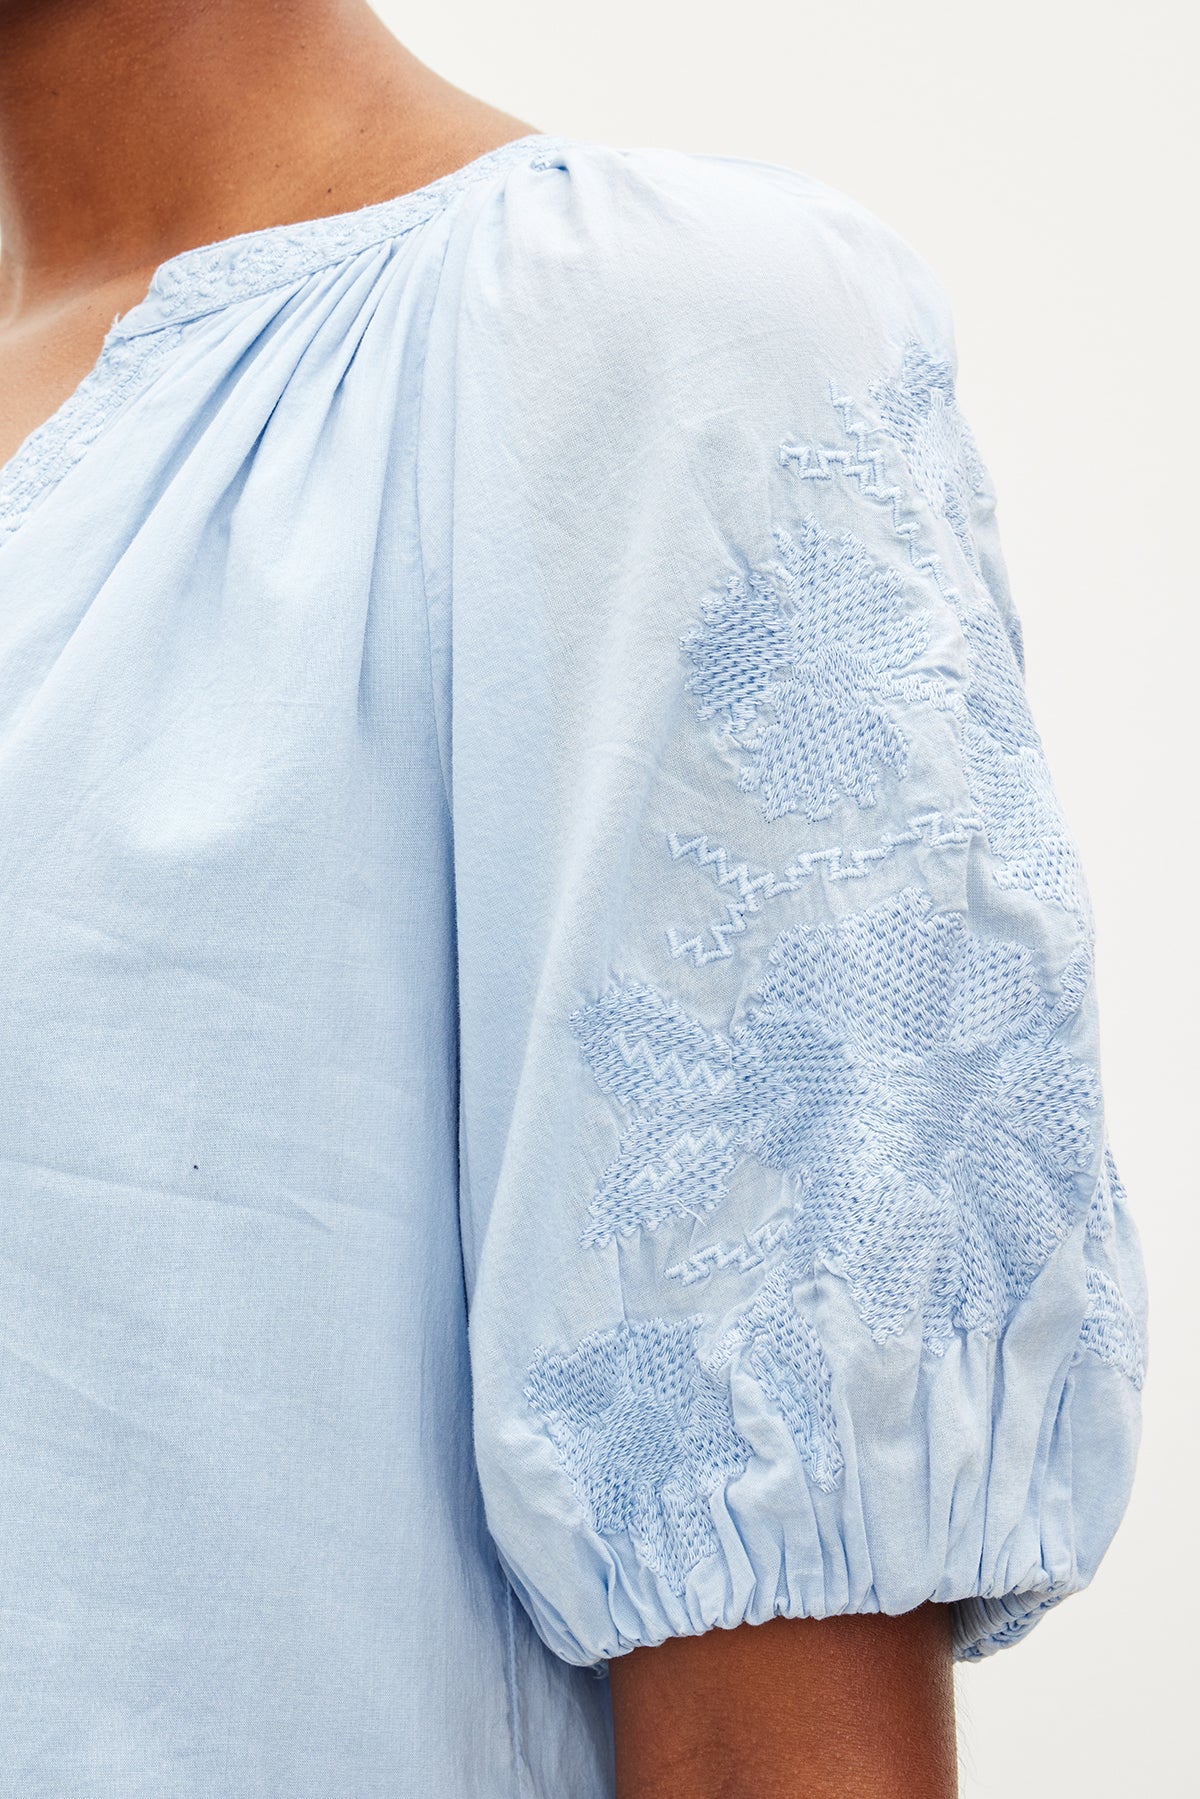 Close-up of a person wearing a Velvet by Graham & Spencer CHRISSY EMBROIDERED BOHO DRESS with delicate floral embroidery on the shoulder.-35955557433537